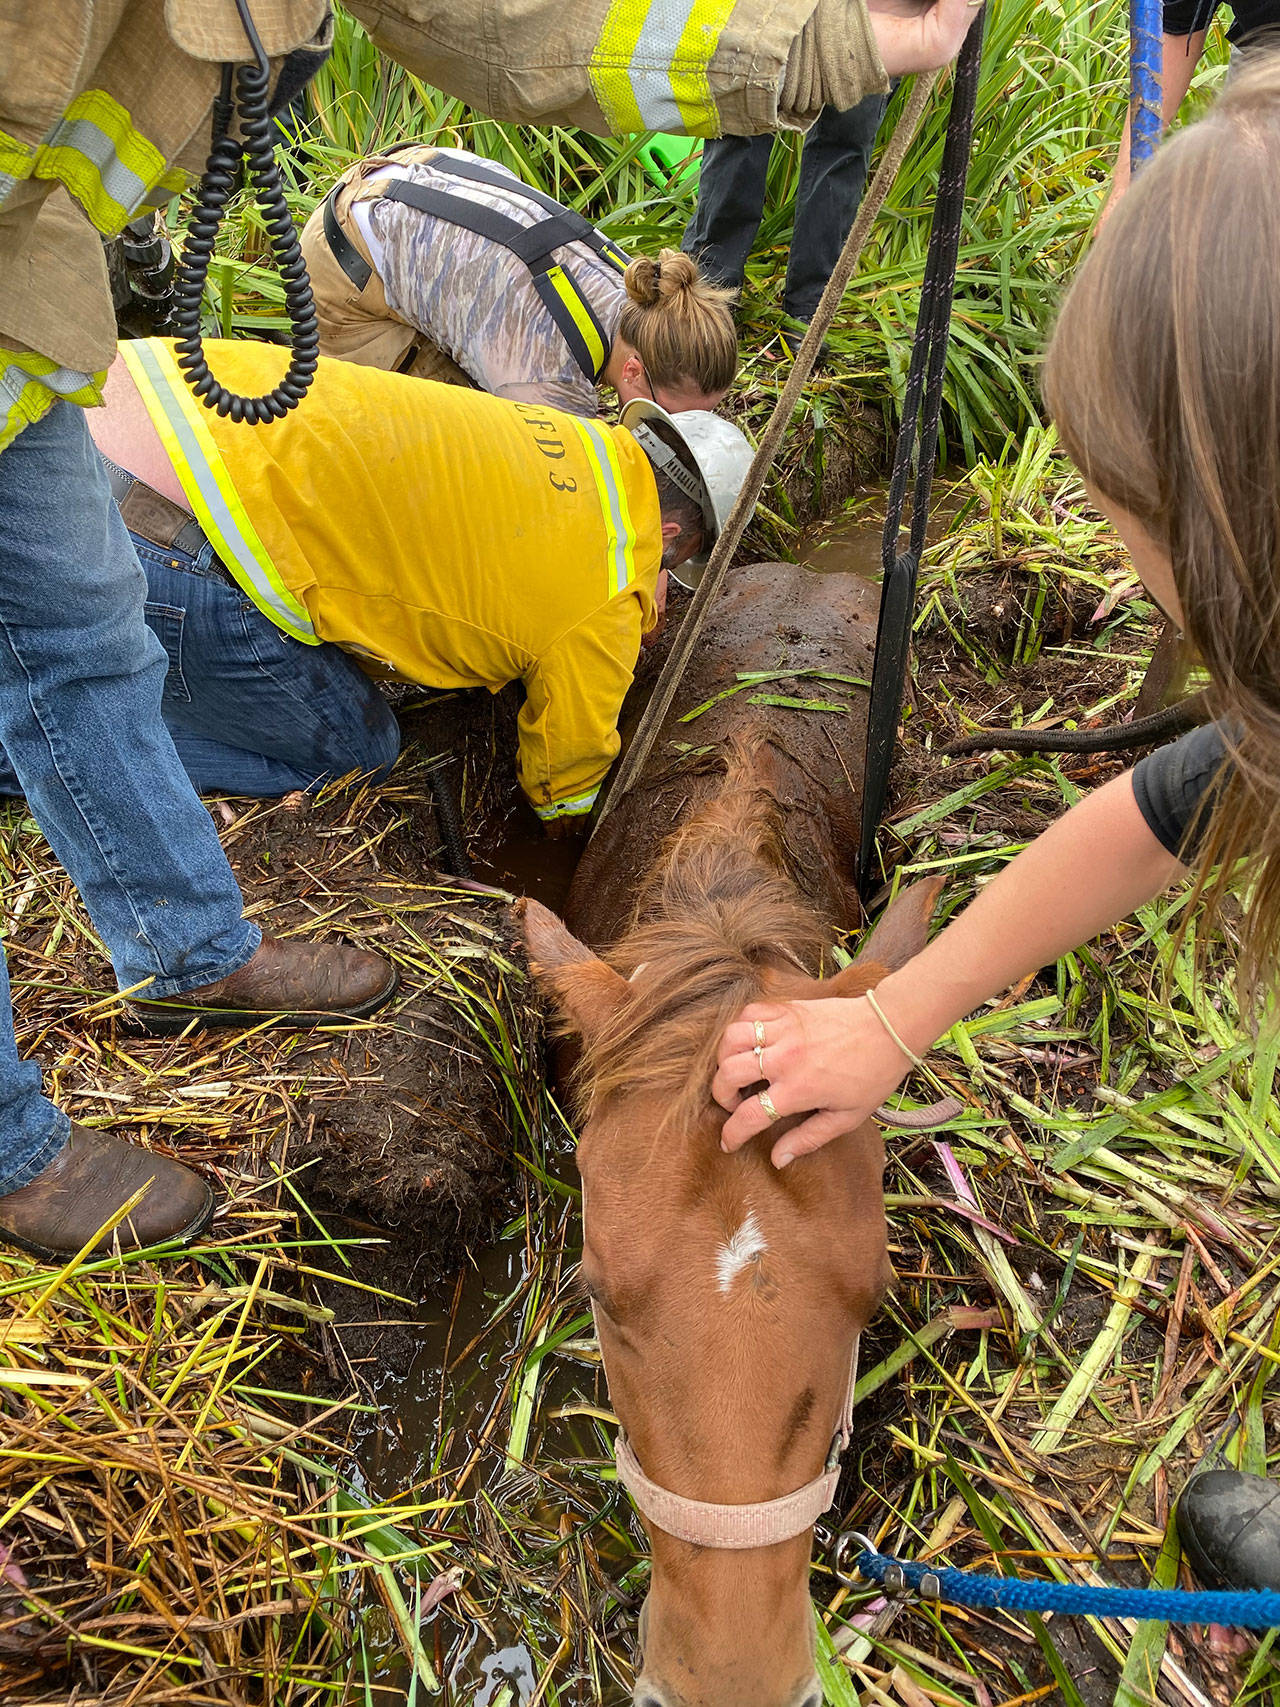 Photo provided                                South Whidbey Fire/EMS personnel work to remove a horse stuck in the mud Sunday morning.